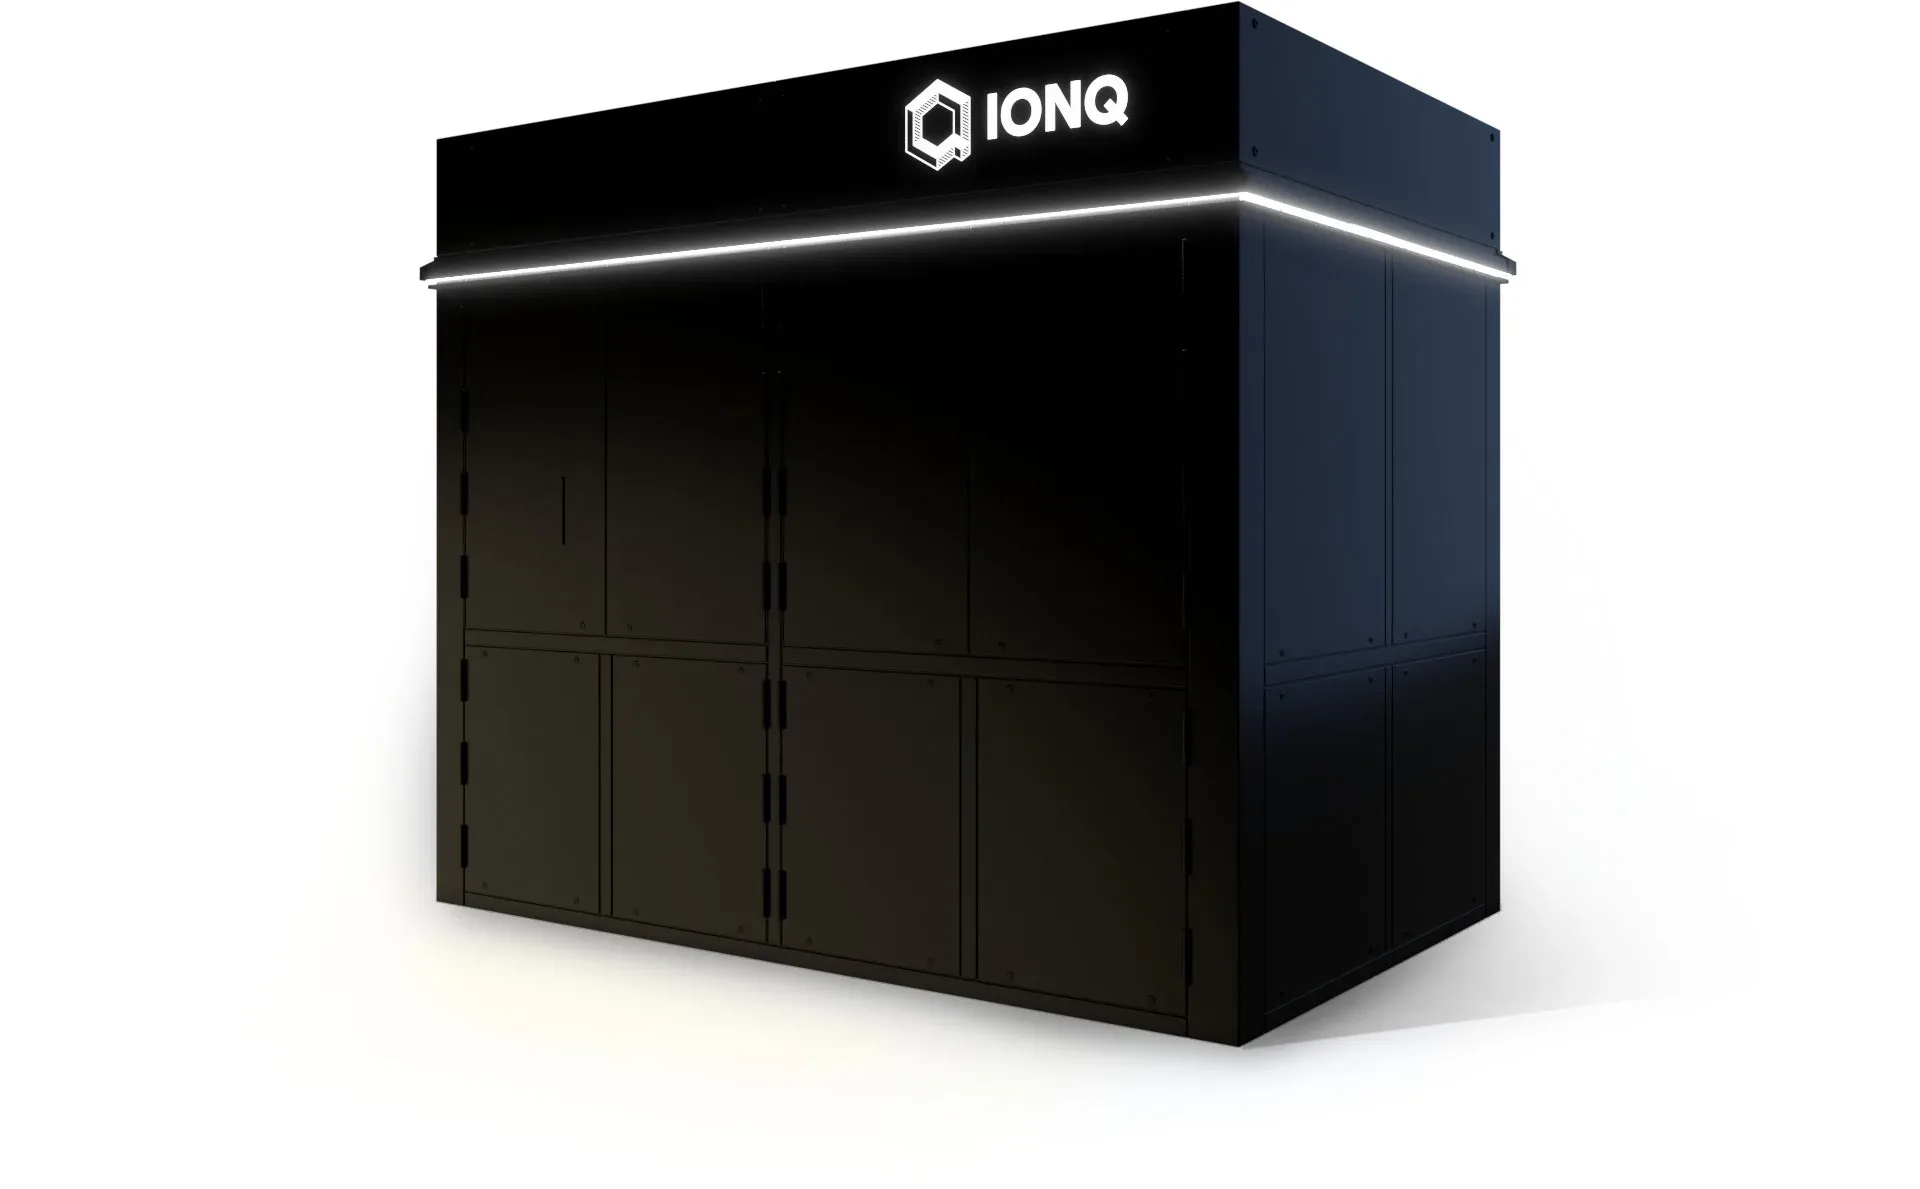 Ionq Team Up With Softbank Investment Advisers In Its Pursuit To Take Quantum Global